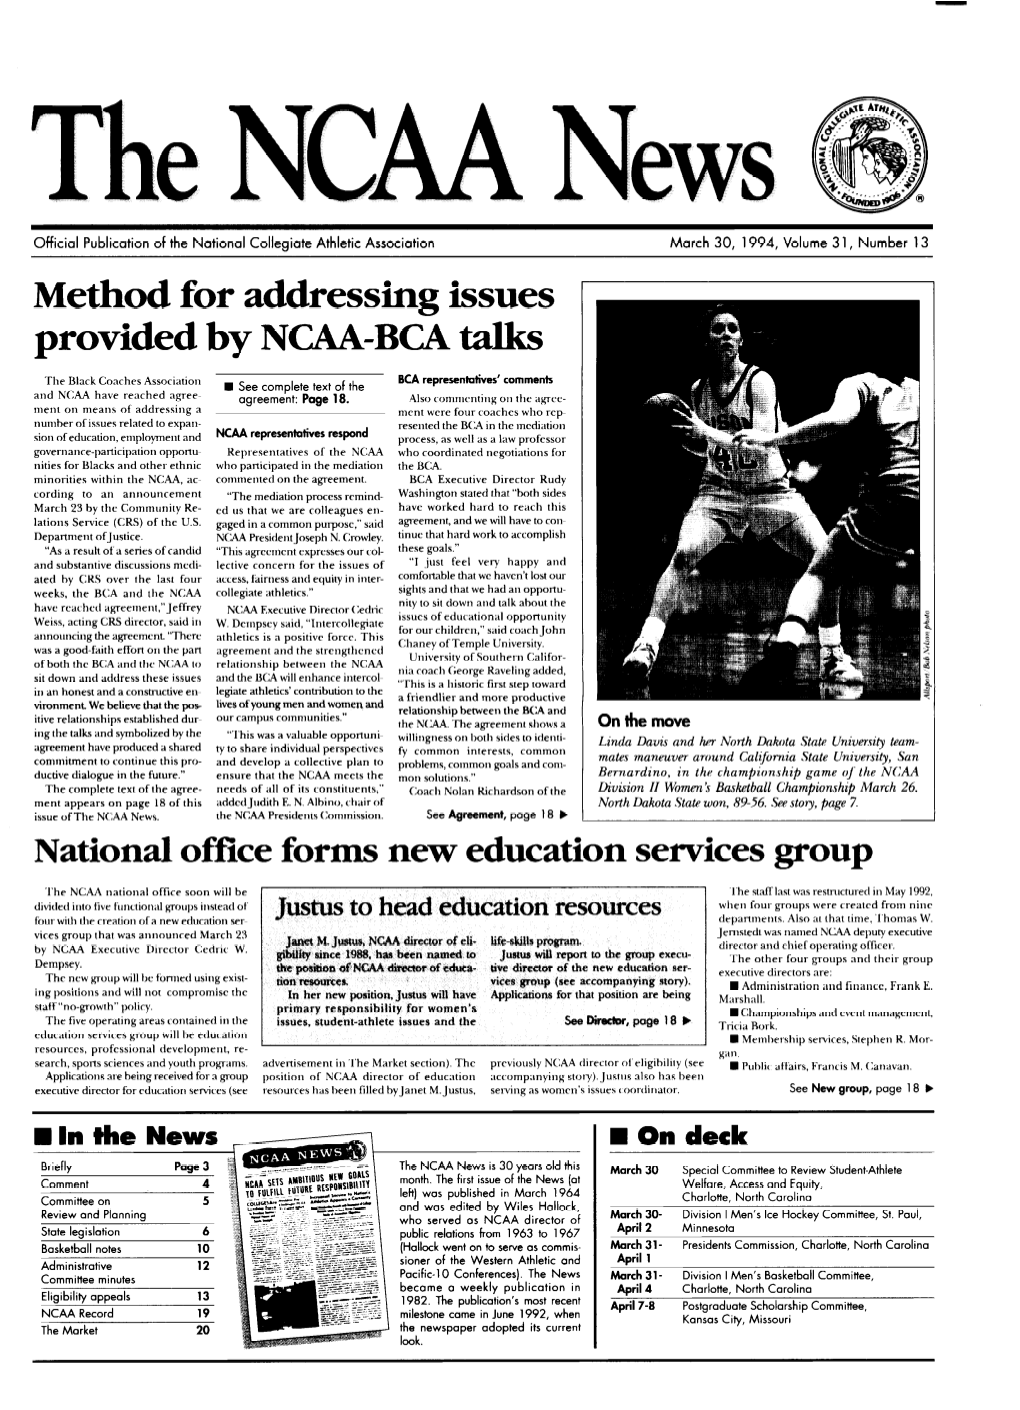 The NCAA News Is 30 Years Old This March 30 Special Committee to Review Student-Athlete Comment 4 Month